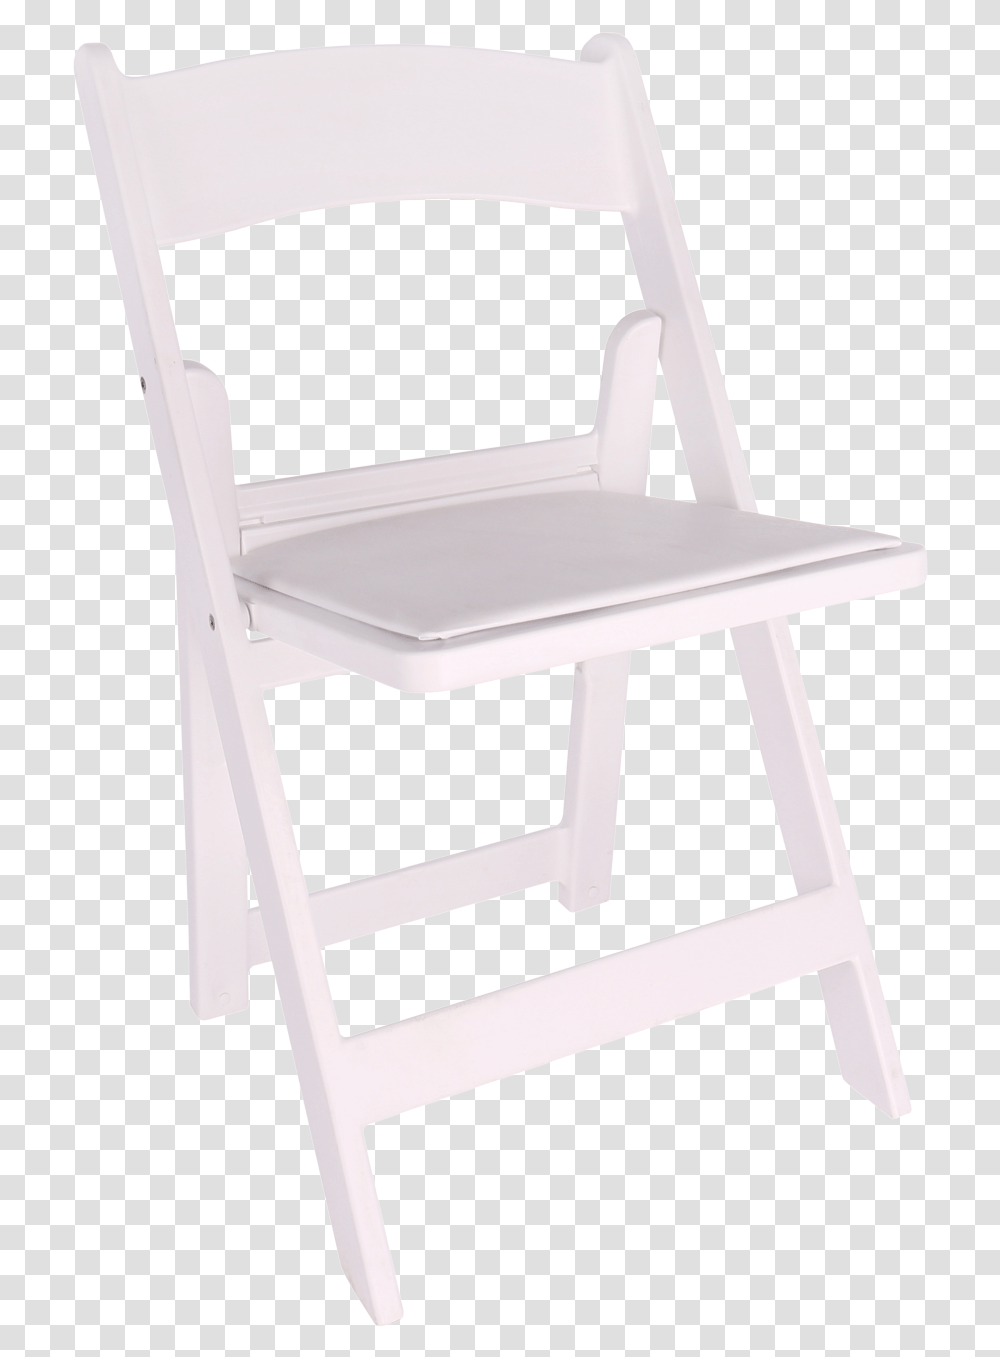 Chair White Resin Folding Chair With Padded Seat White Resin Folding With White Padded Seat, Furniture Transparent Png